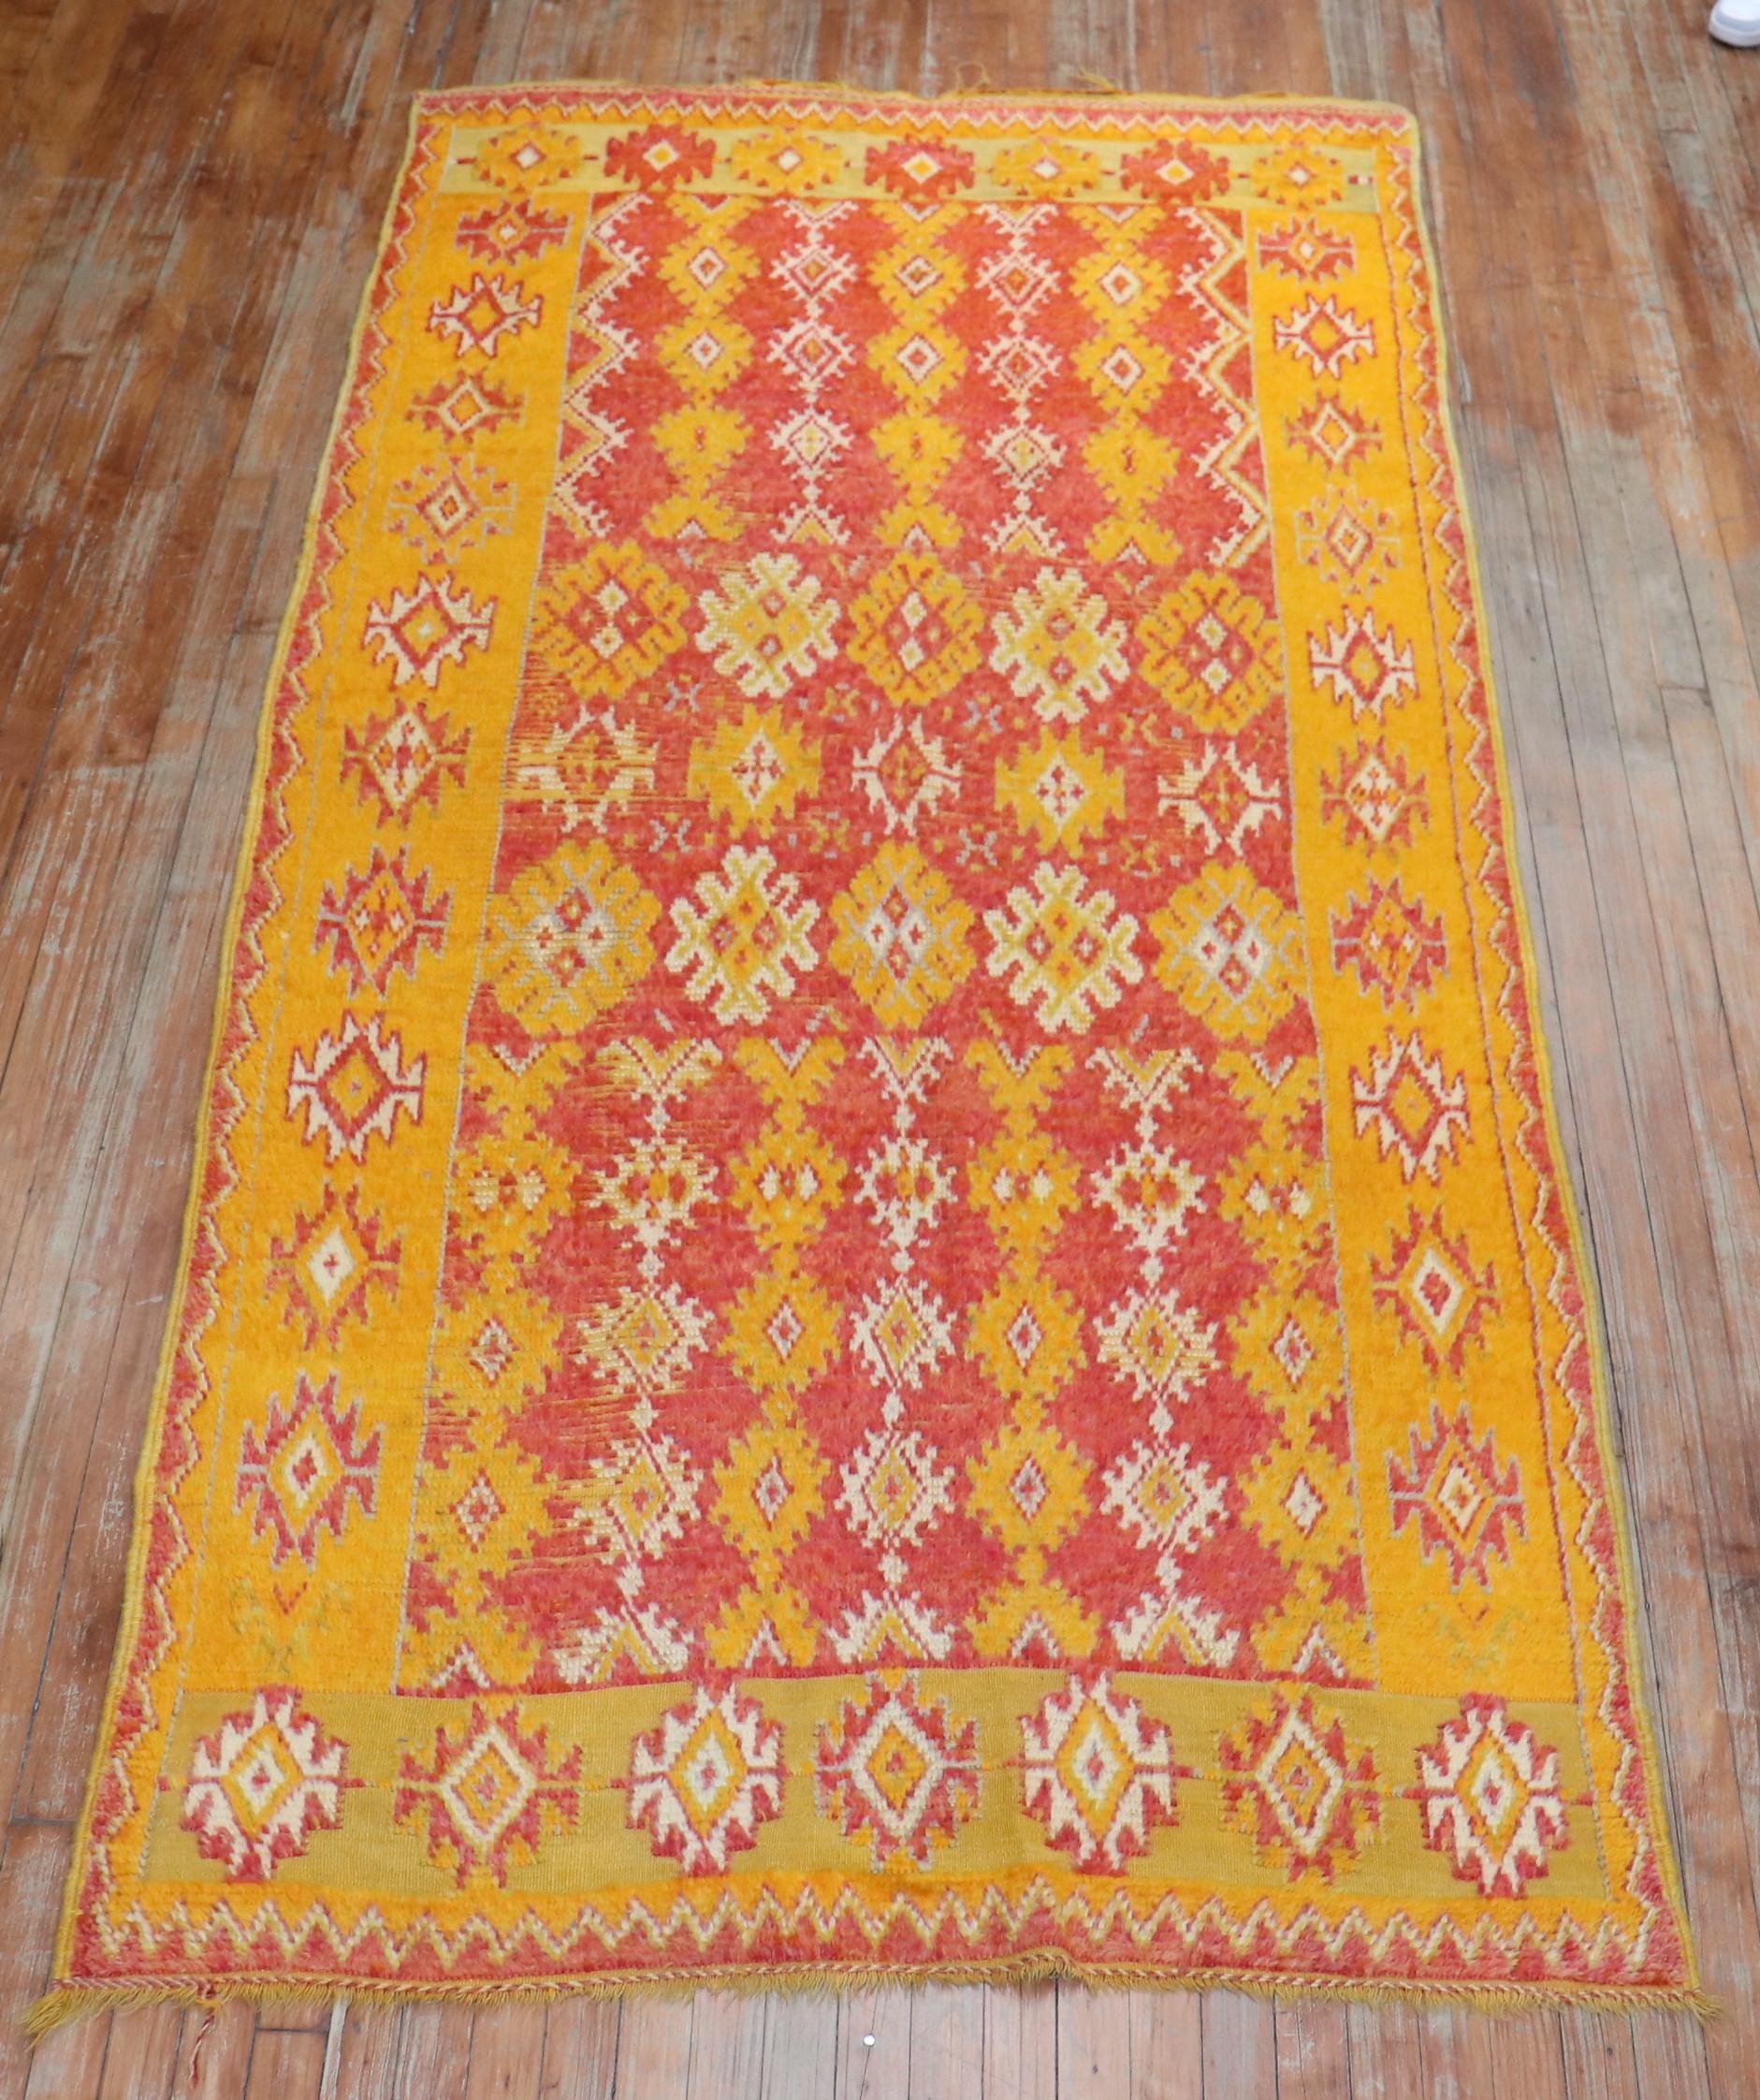 A one-of-a-kind Authentic Moroccan accent size rug from the middle of the 20th century. This piece is pretty wild and fun. If you are in love take a dive and make a big splash!

Measures: 4'6'' x 9'2''.
 
 